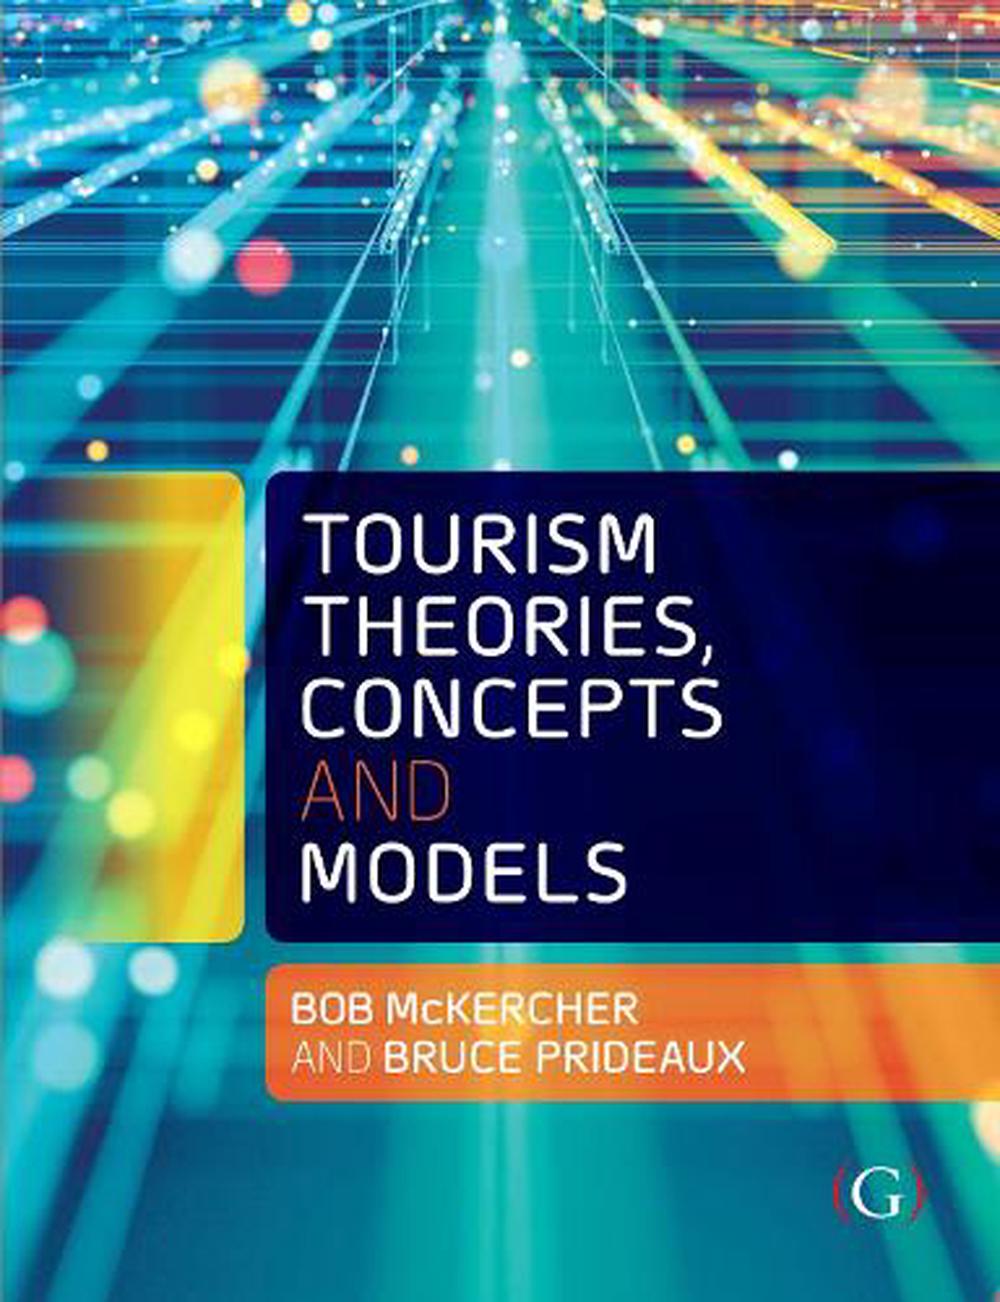 historical tourism theory and practice